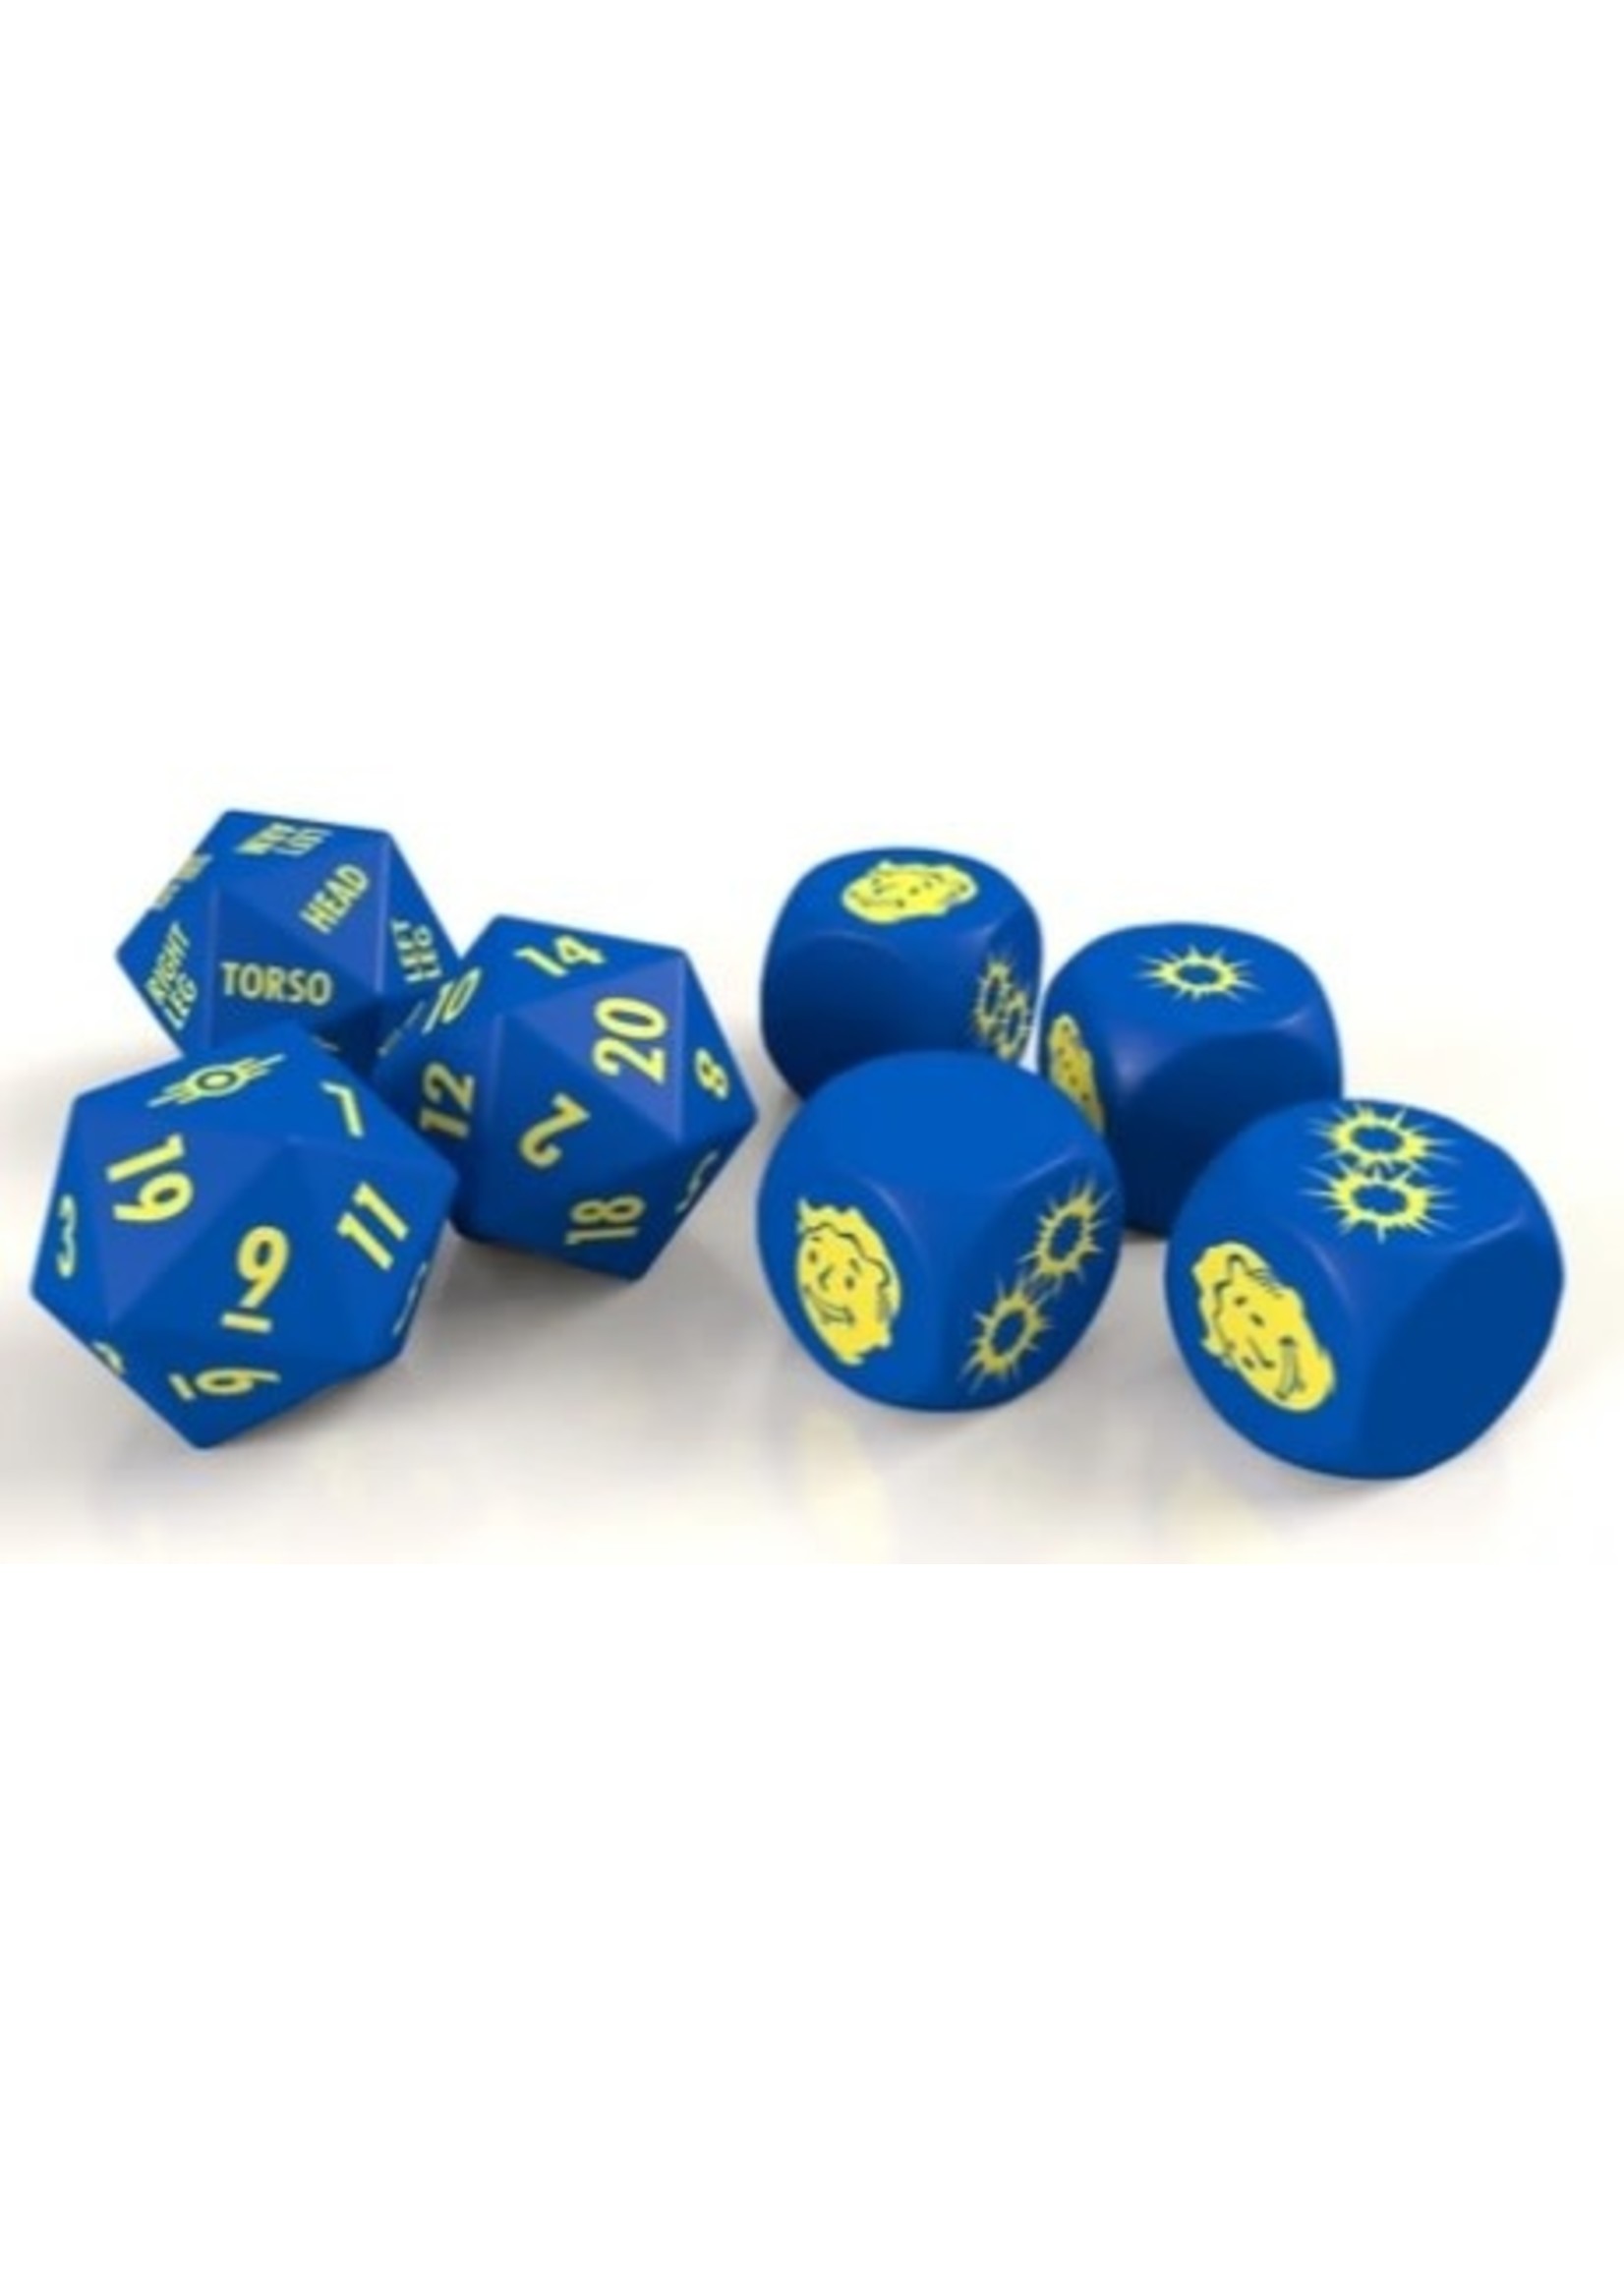 Modiphius Fallout Roleplaying Dice Set